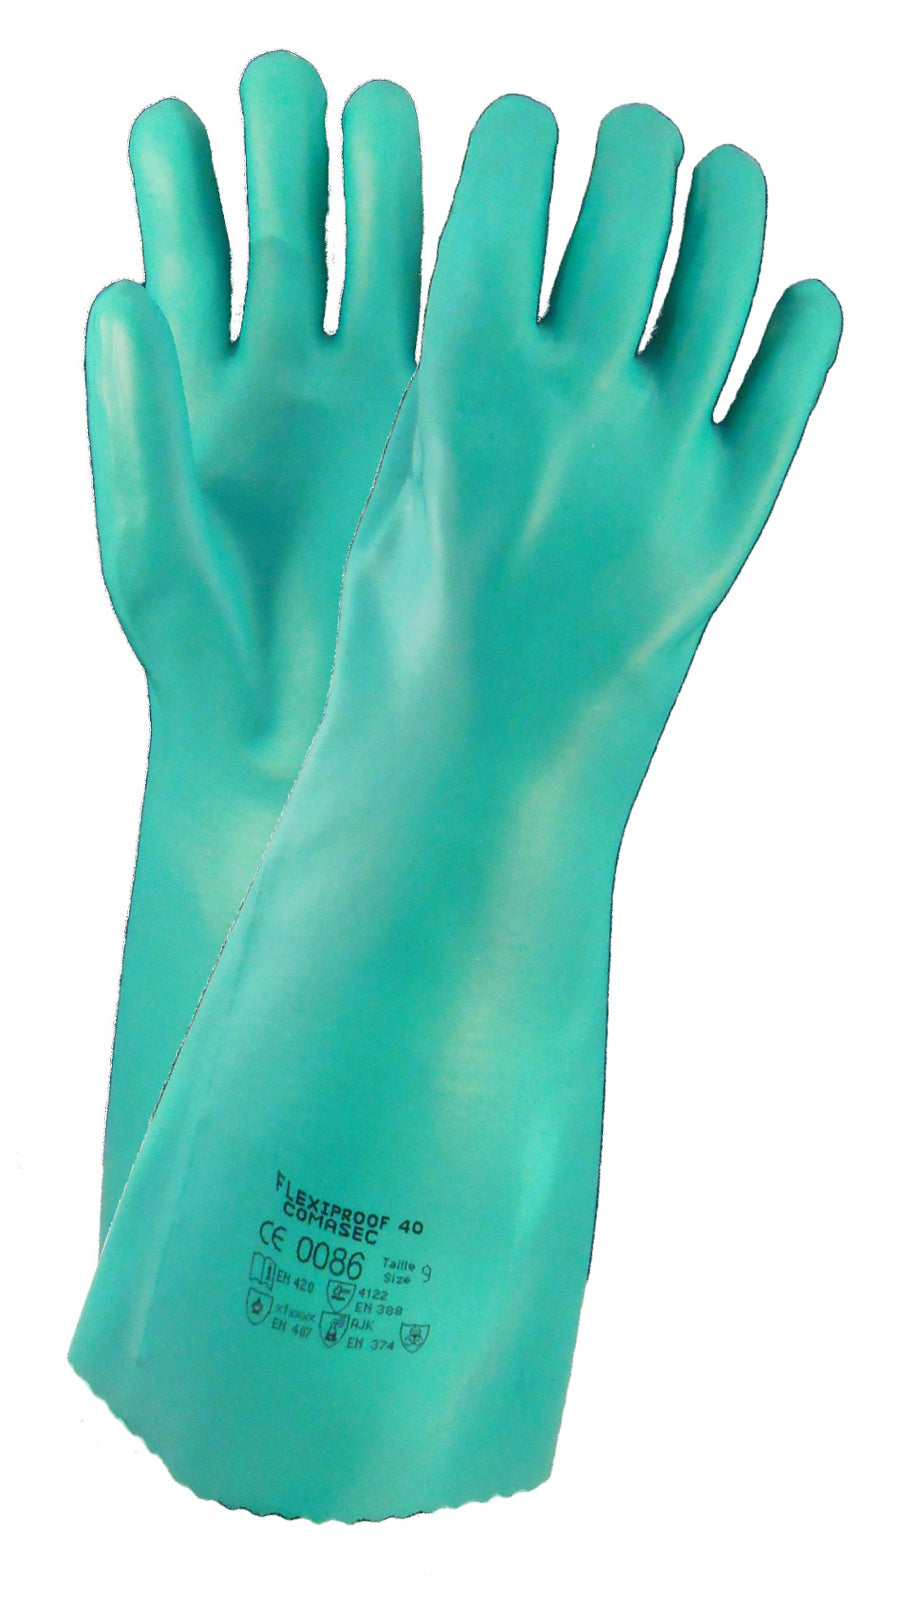 Comasec Flexiproof Nitrile Chemical Protection Gauntlets 40cm